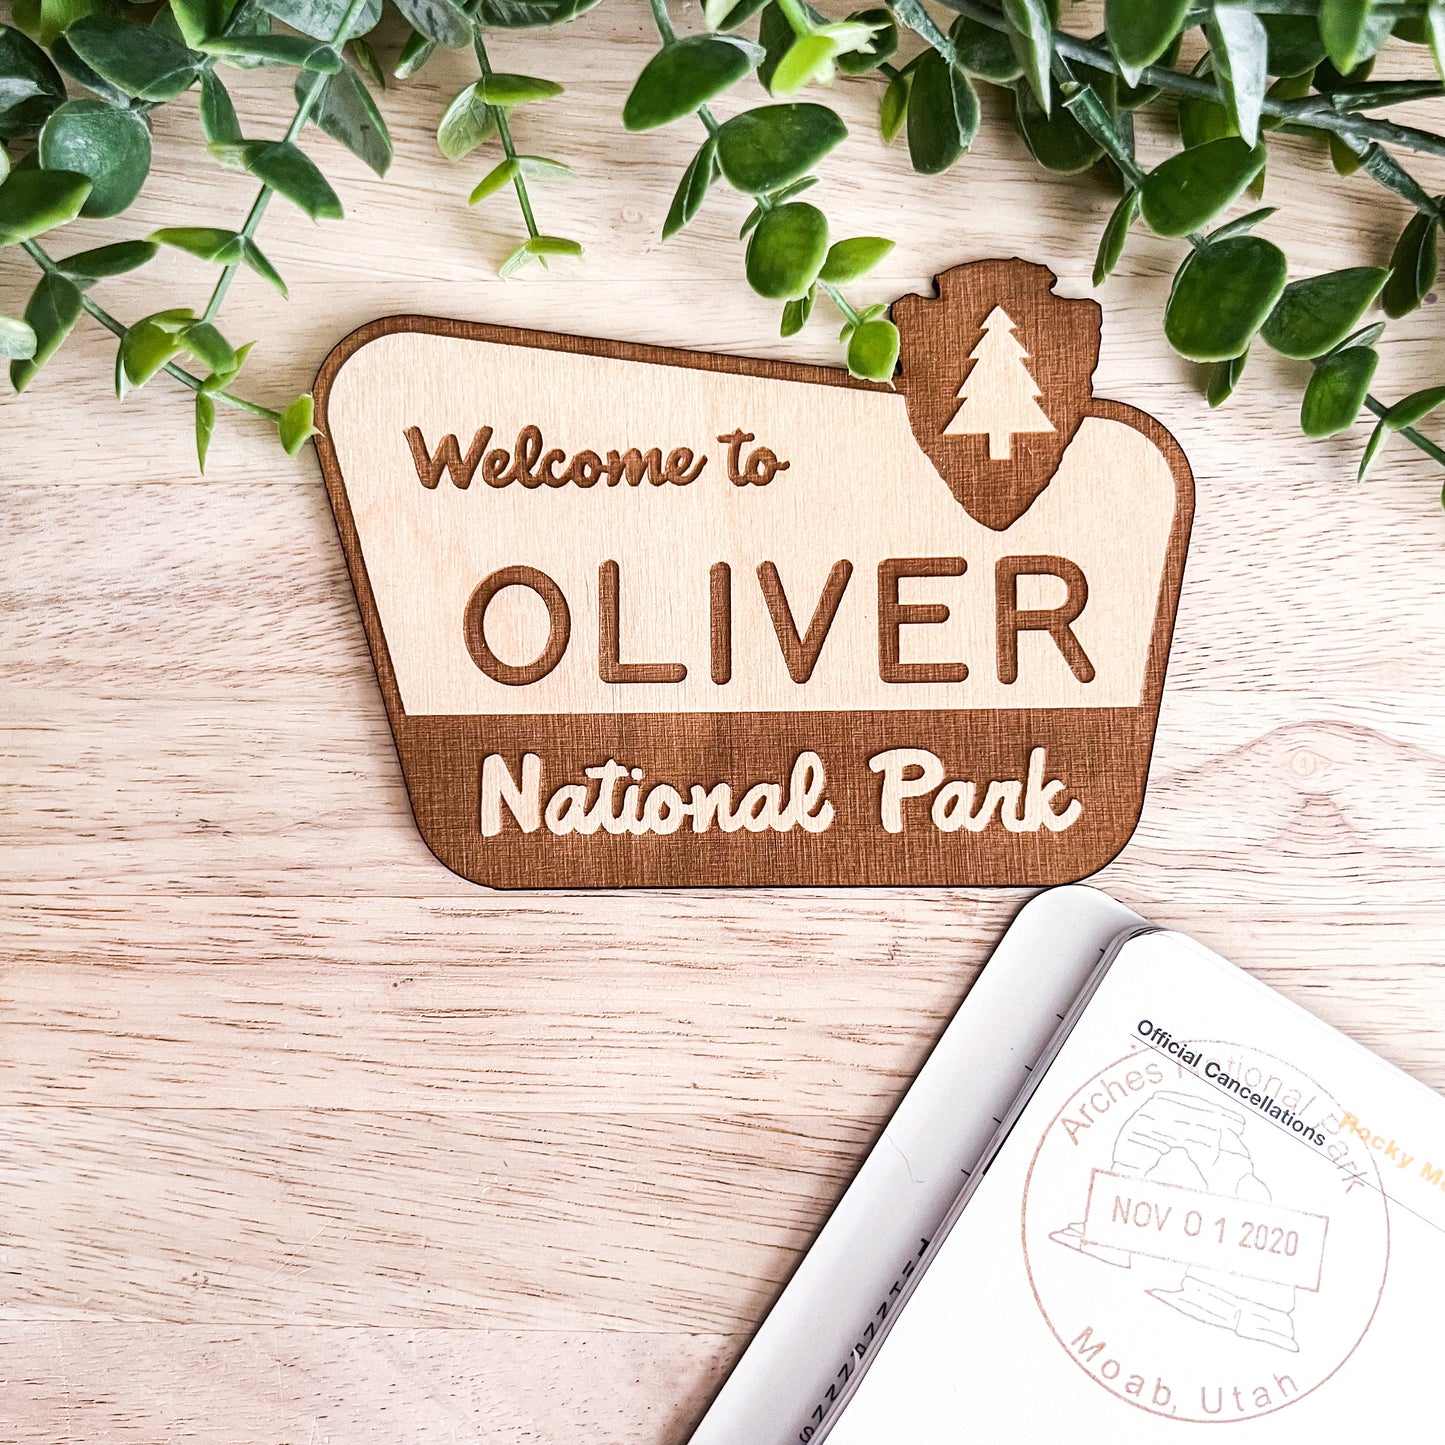 National Park Sign / Baby Name Sign / Last Name Sign / Wooden Name Sign / Baby Announcement Sign